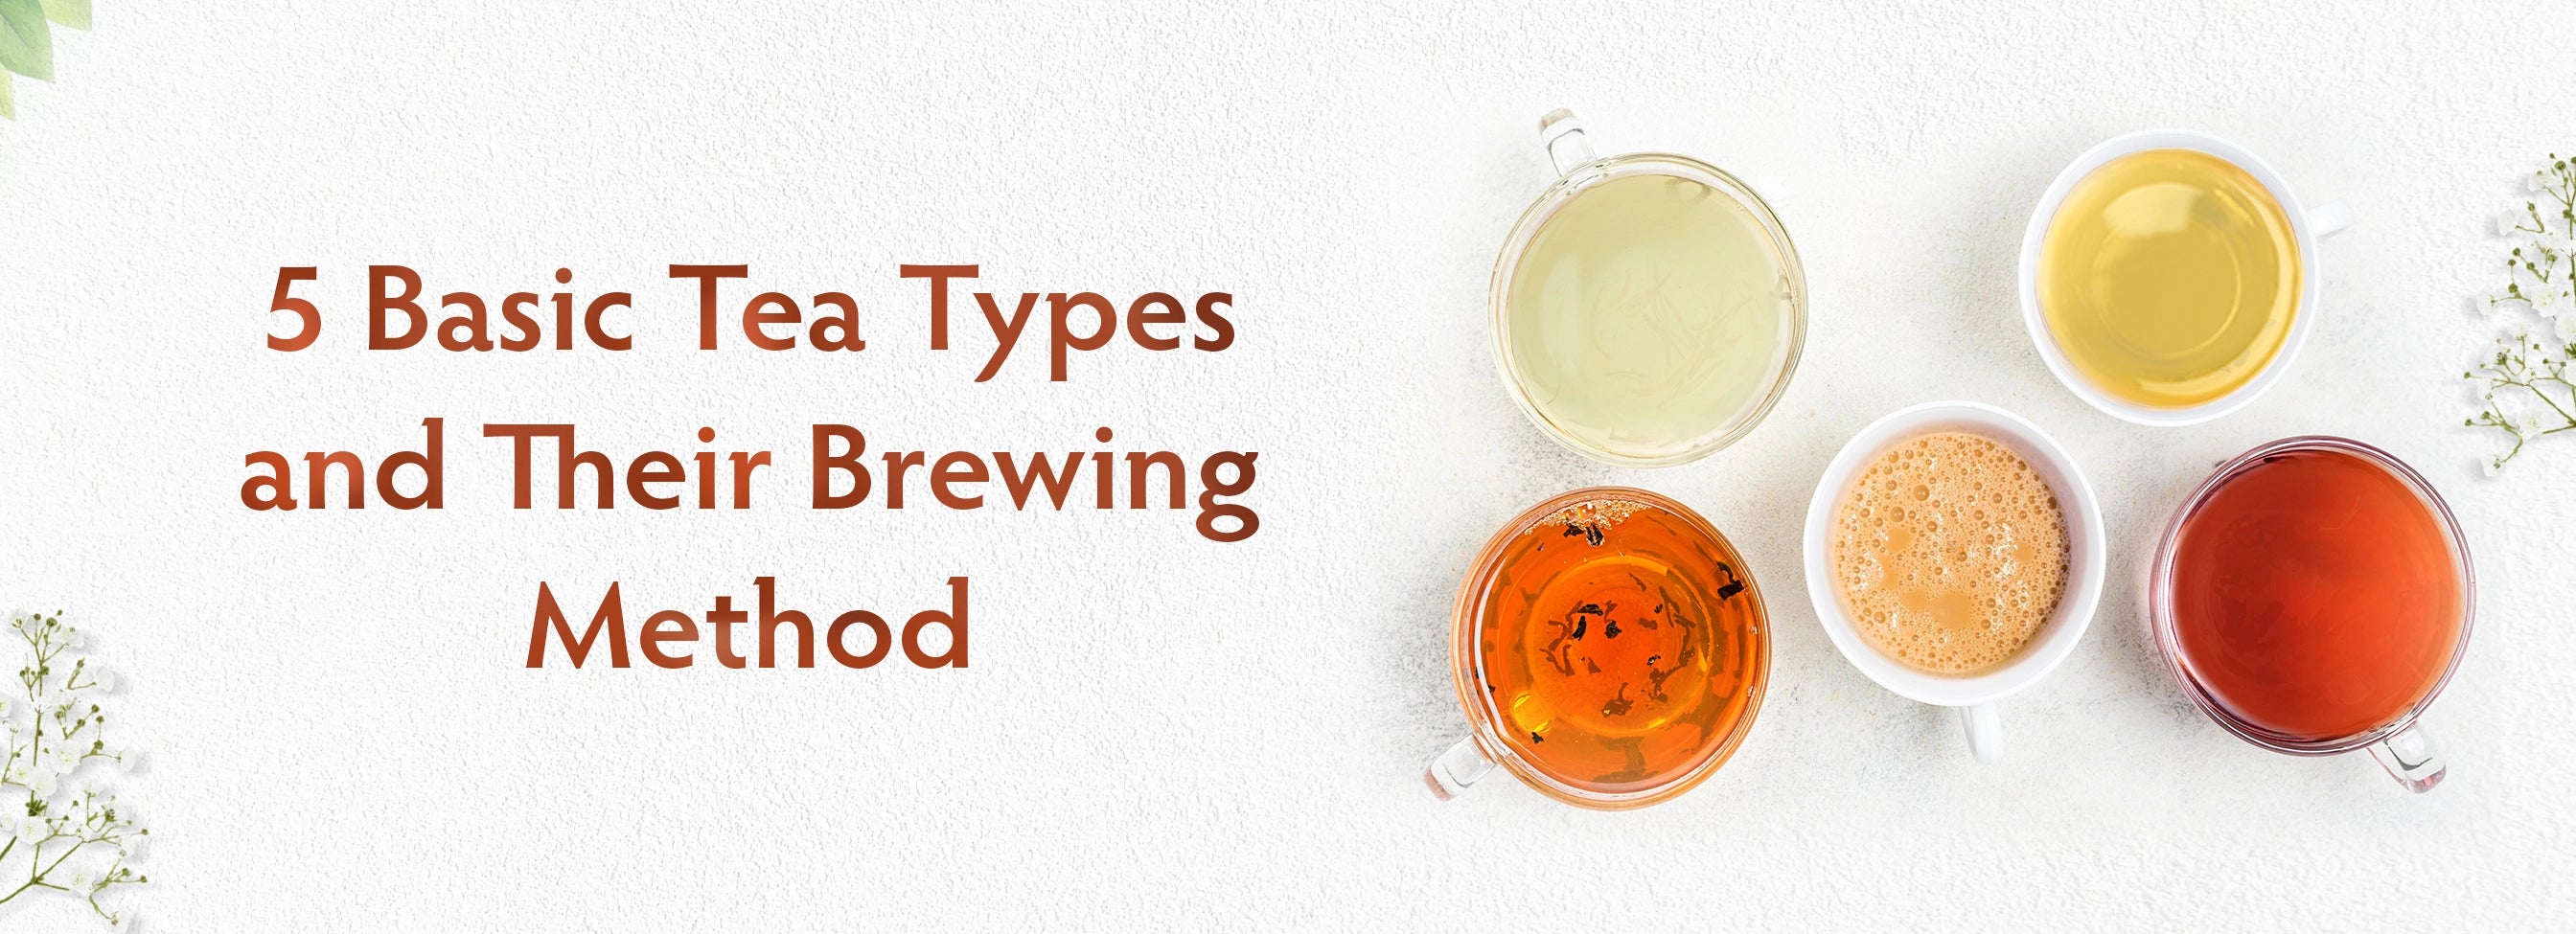 5 Basic Tea Types and Their Brewing Methods